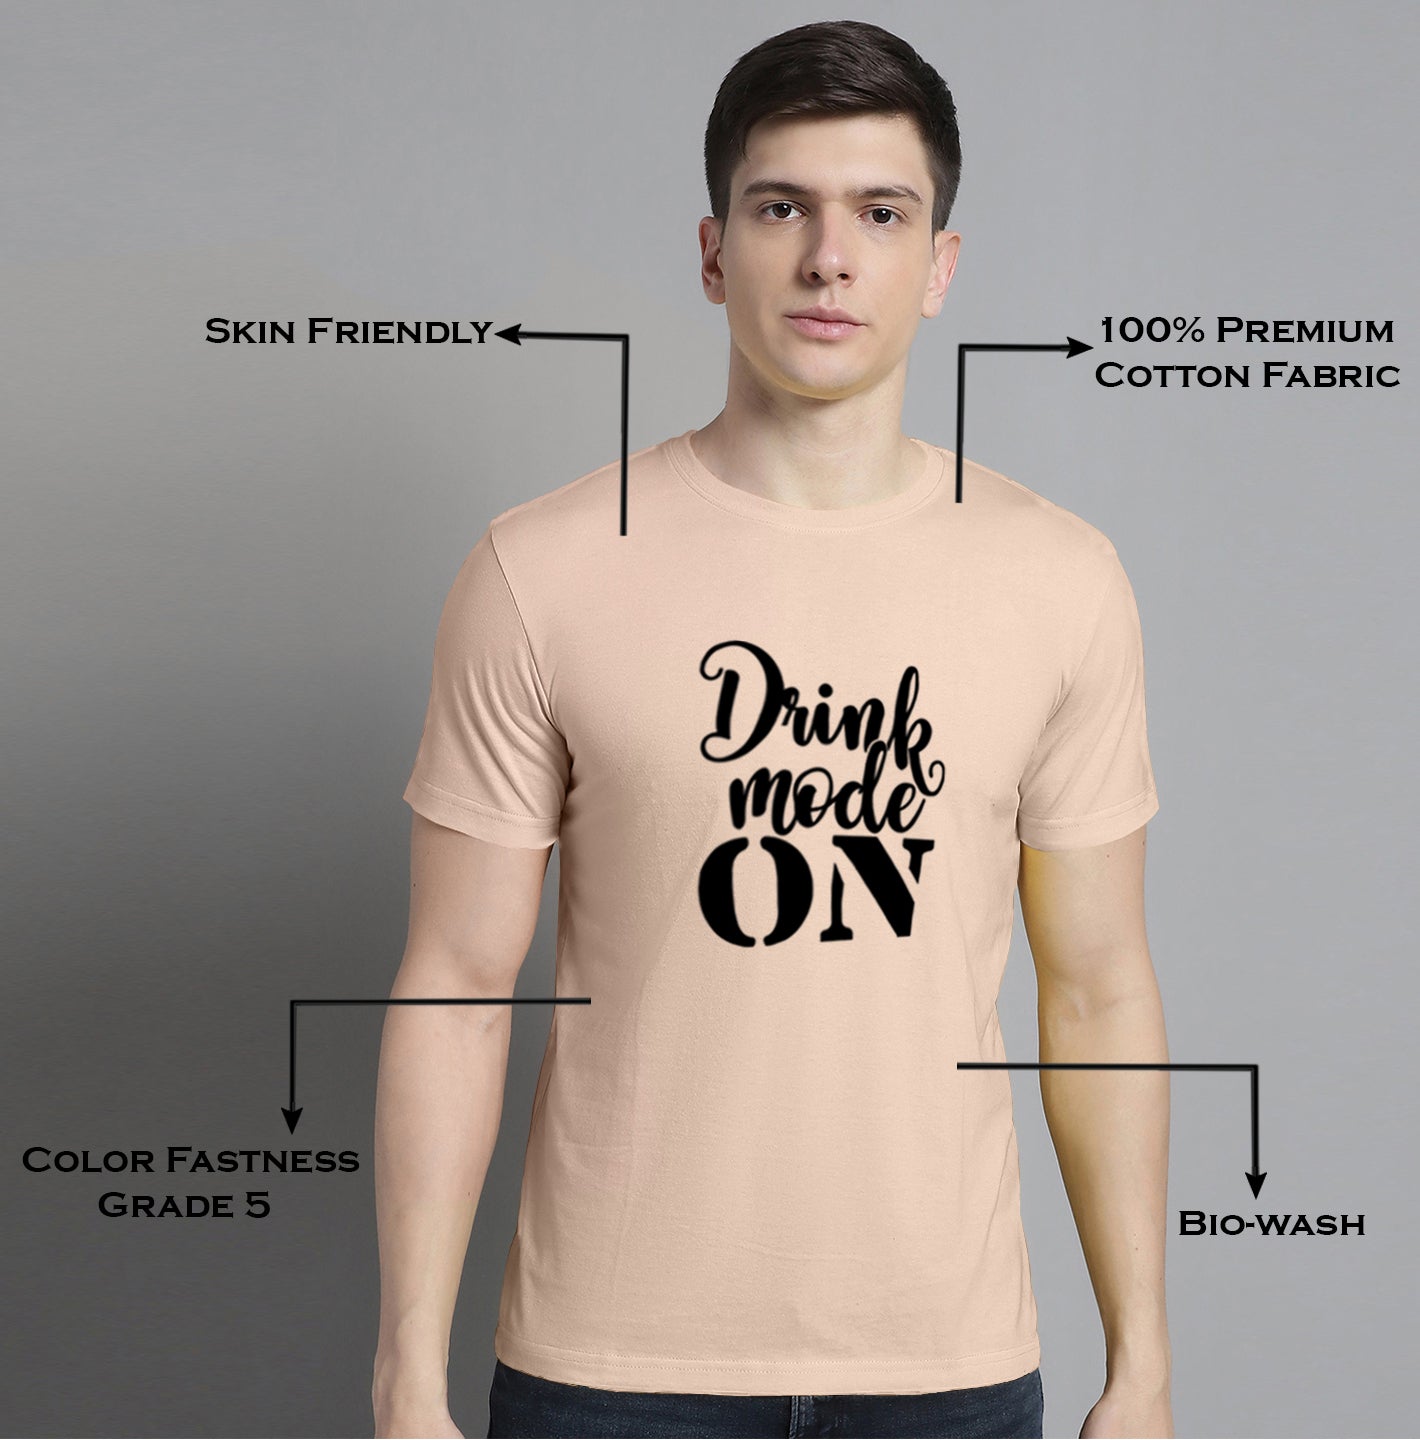 Fbar Drink Mode On Cotton Round Neck T-Shirt - Friskers